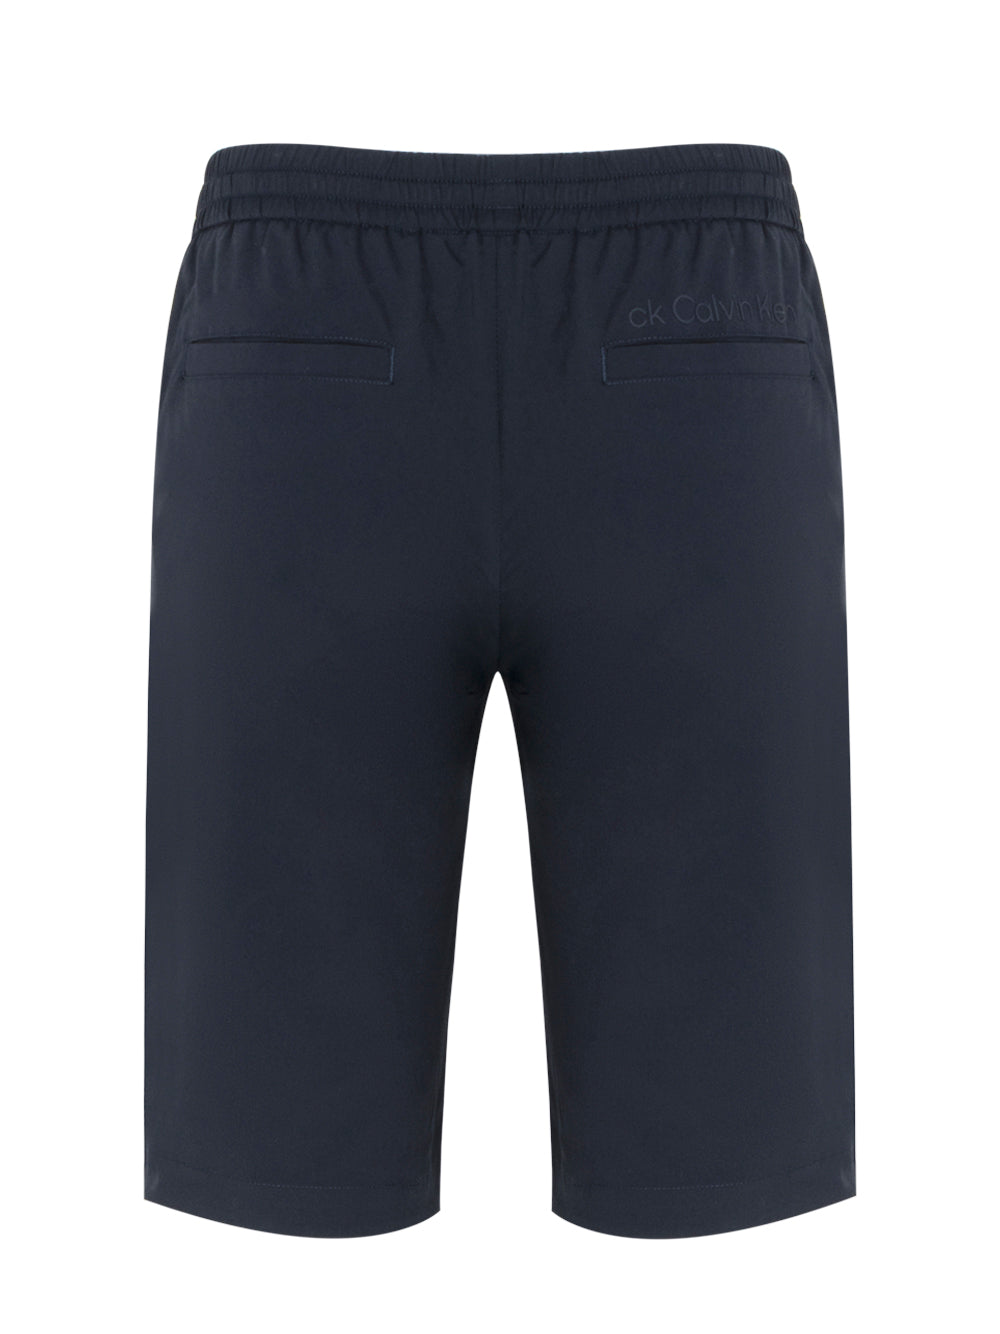 Exposed Drawcord Elasticated Shorts (Navy)